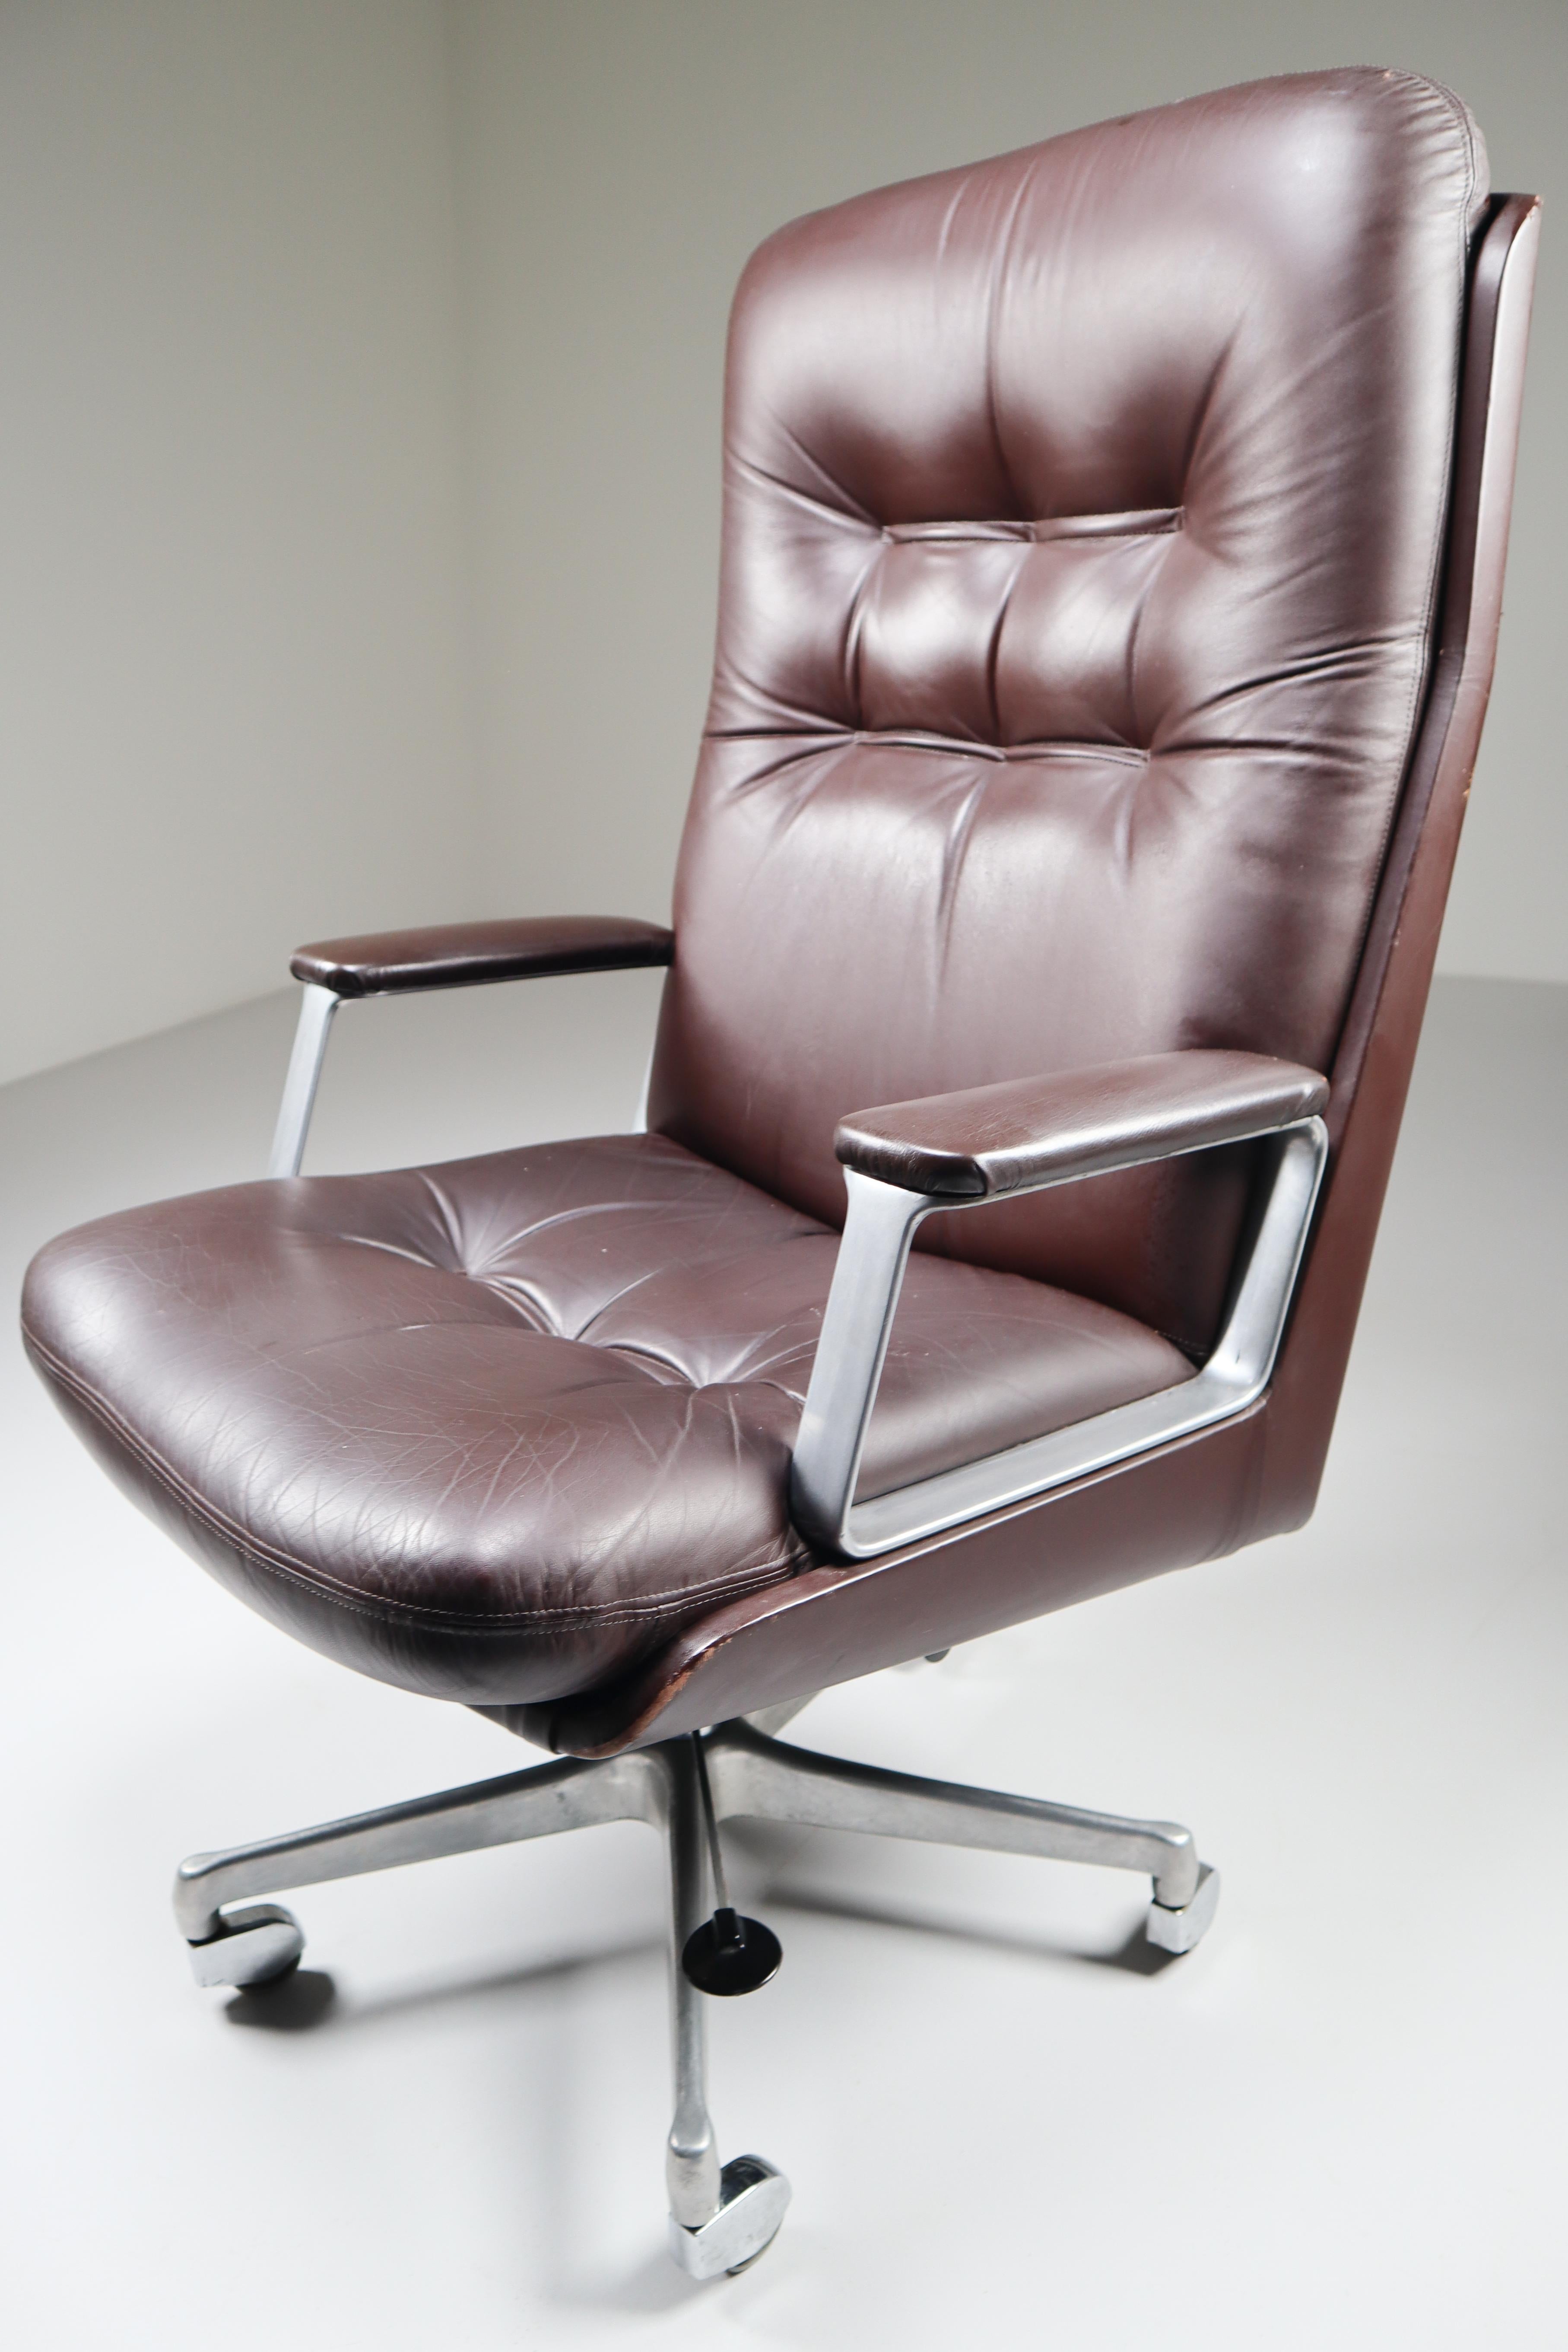 Executive office high back chair by Osvaldo Borsani for the Italian manufacturer Tecno features a maroon brown leather body with a generously proportioned button-tufted leather seat and back and floating on a five-pronged rolling adjustable cast